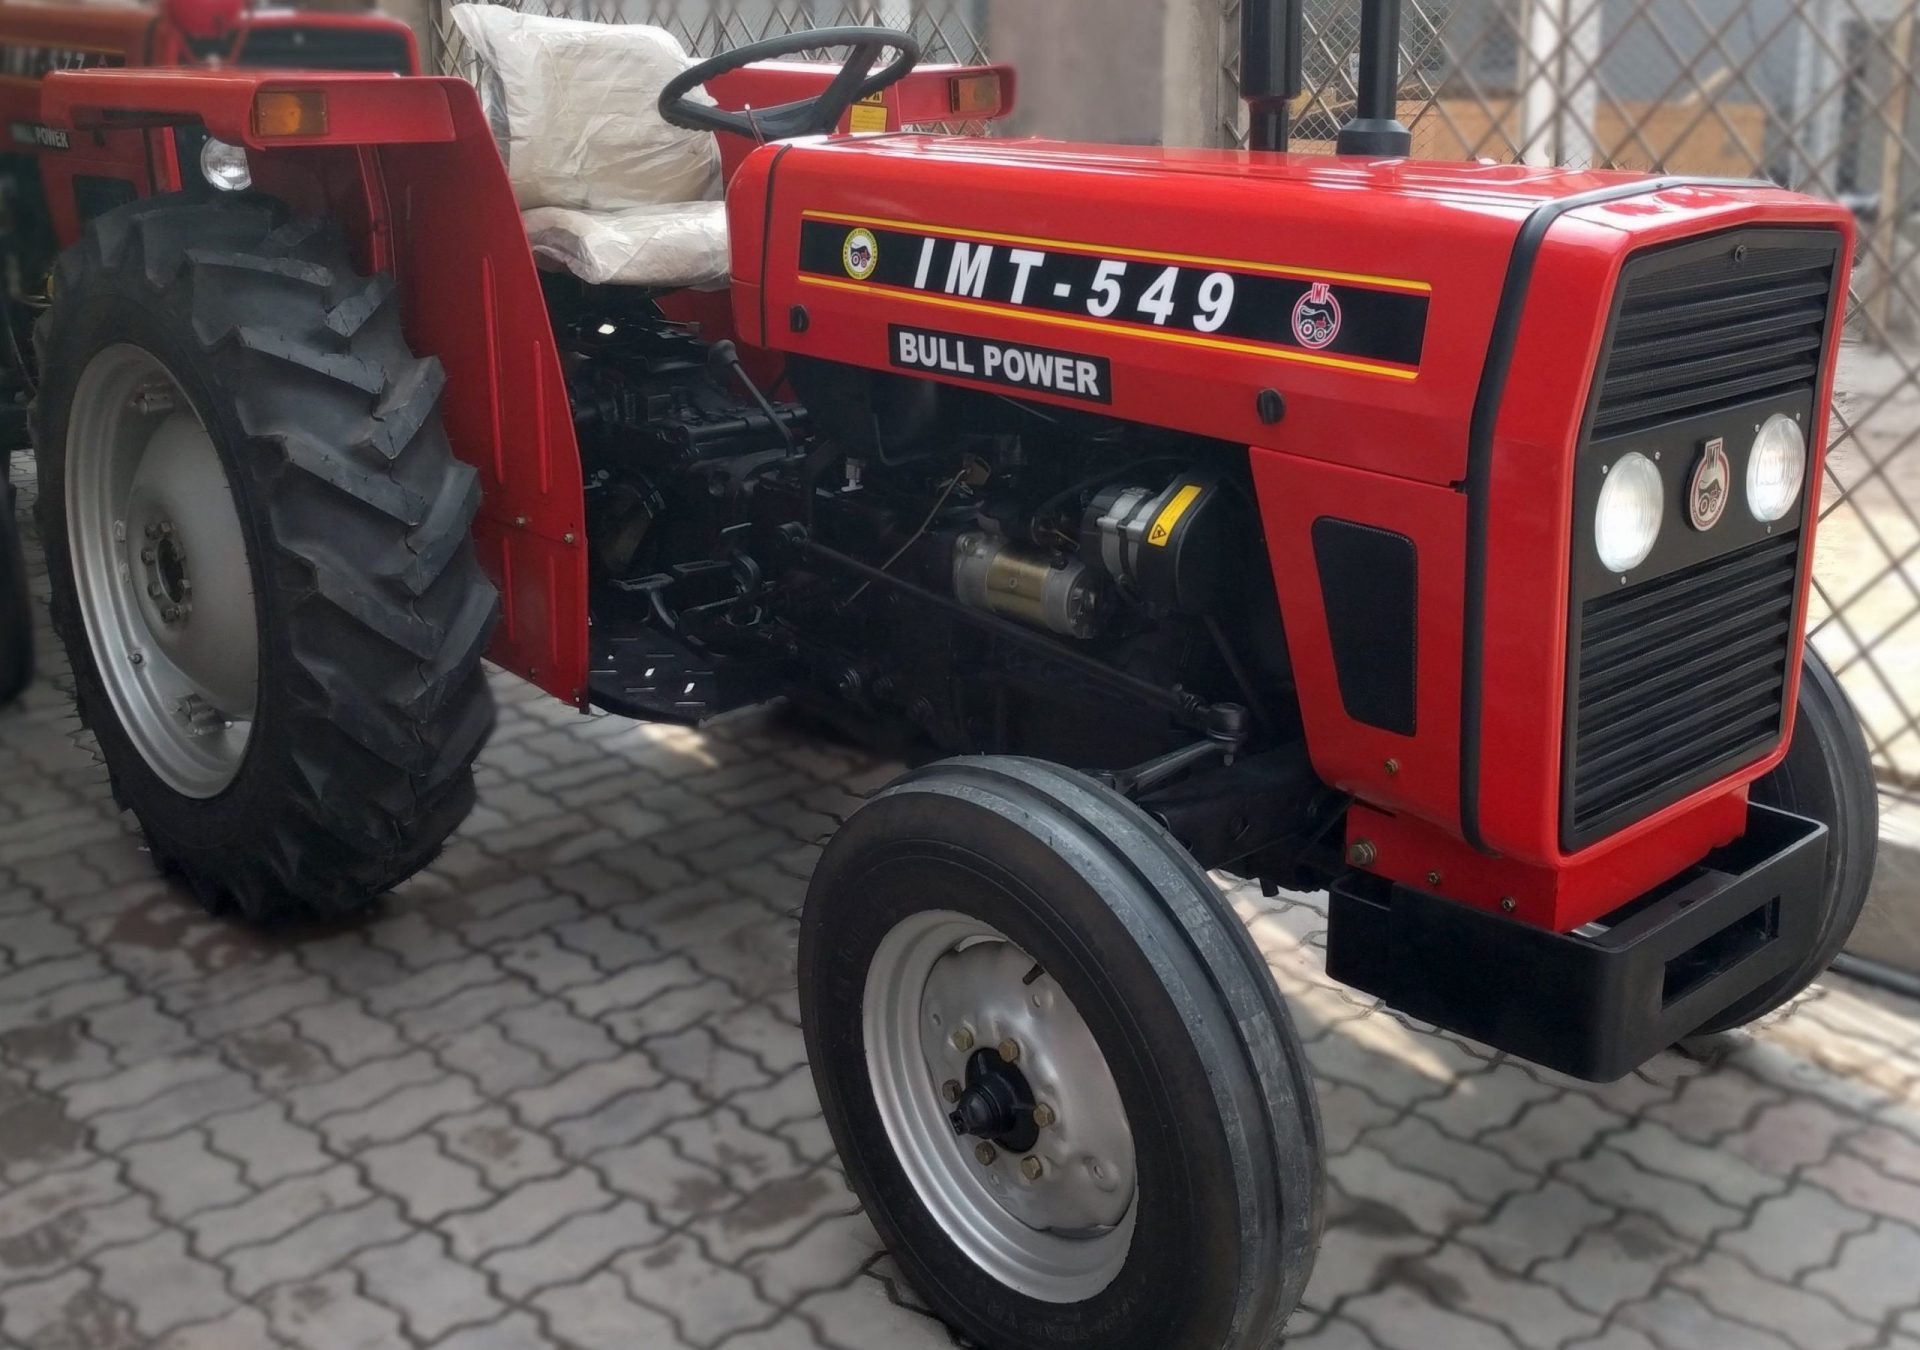 IMT 549 Tractor Price in Pakistan 2023